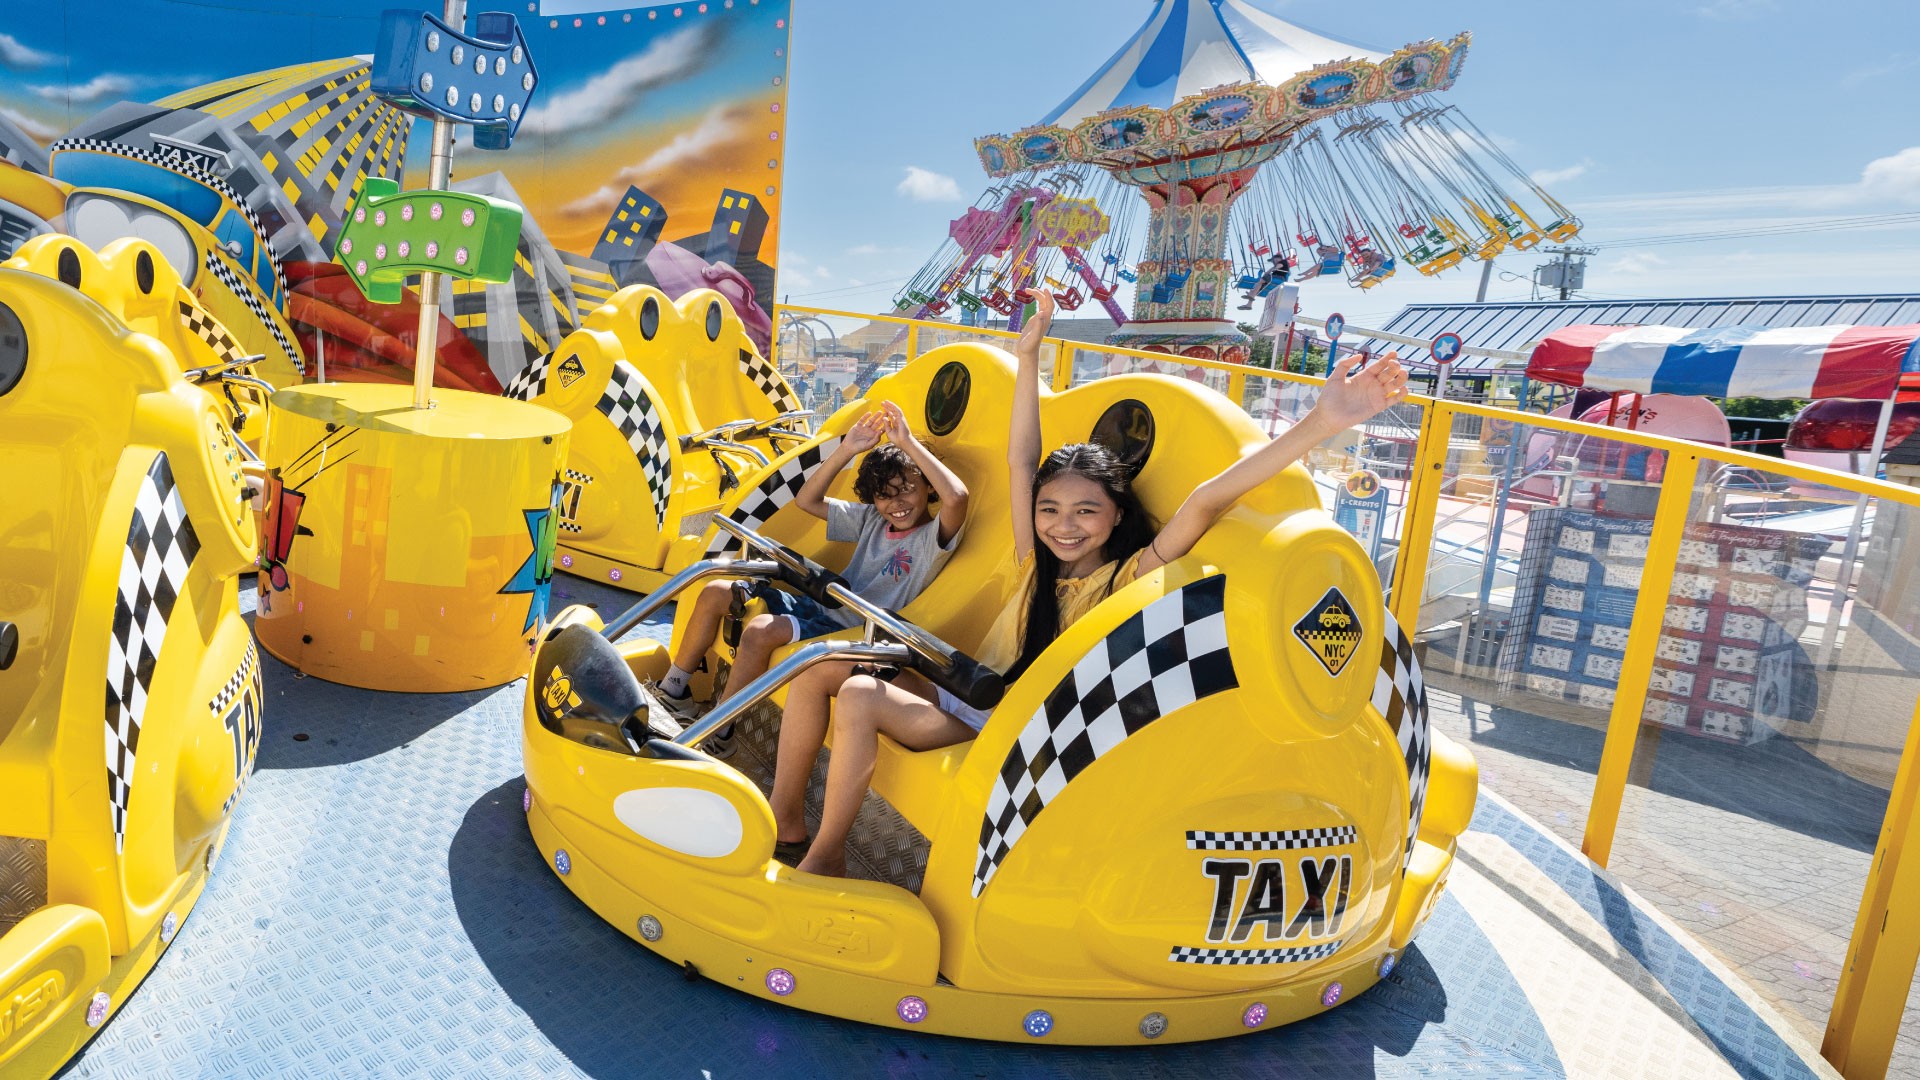 A family enjoying a thrilling ride in a yellow taxi at an amusement park, creating lasting memories.